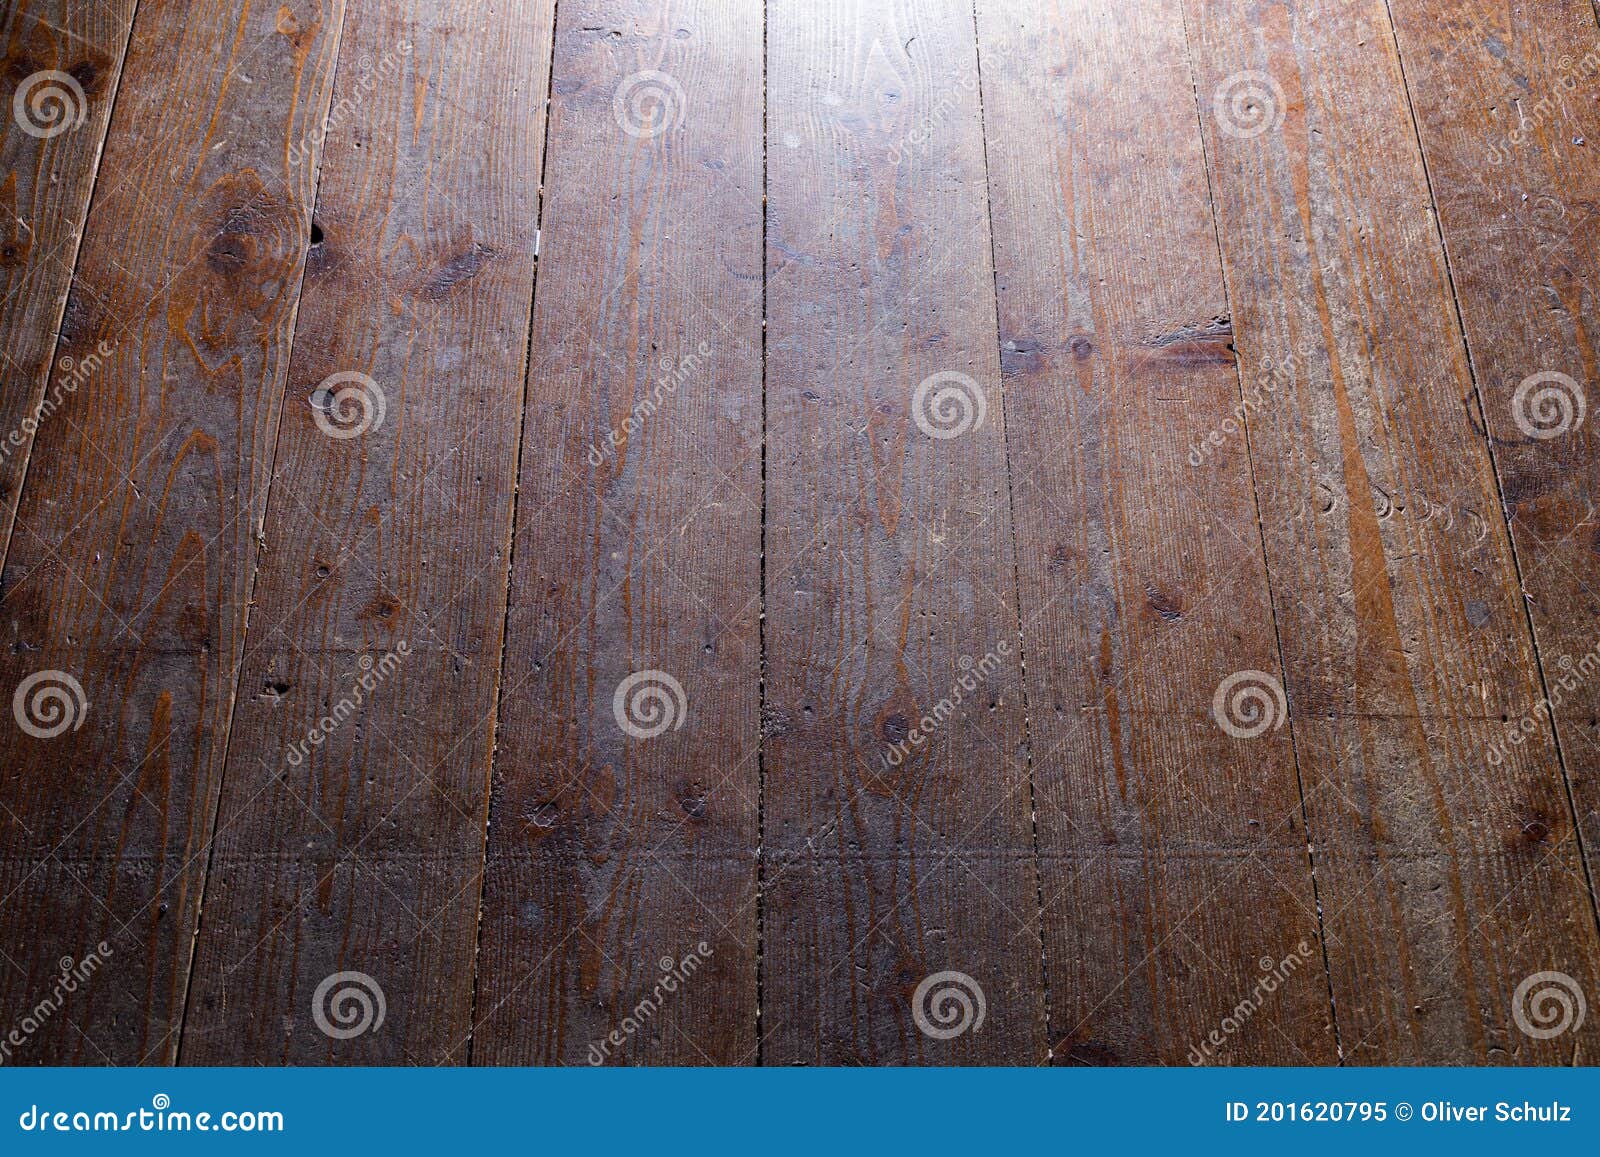 wooden planks with scratches and dirt with light falloff from the top to the bottom, use this background for grundge and scrathced